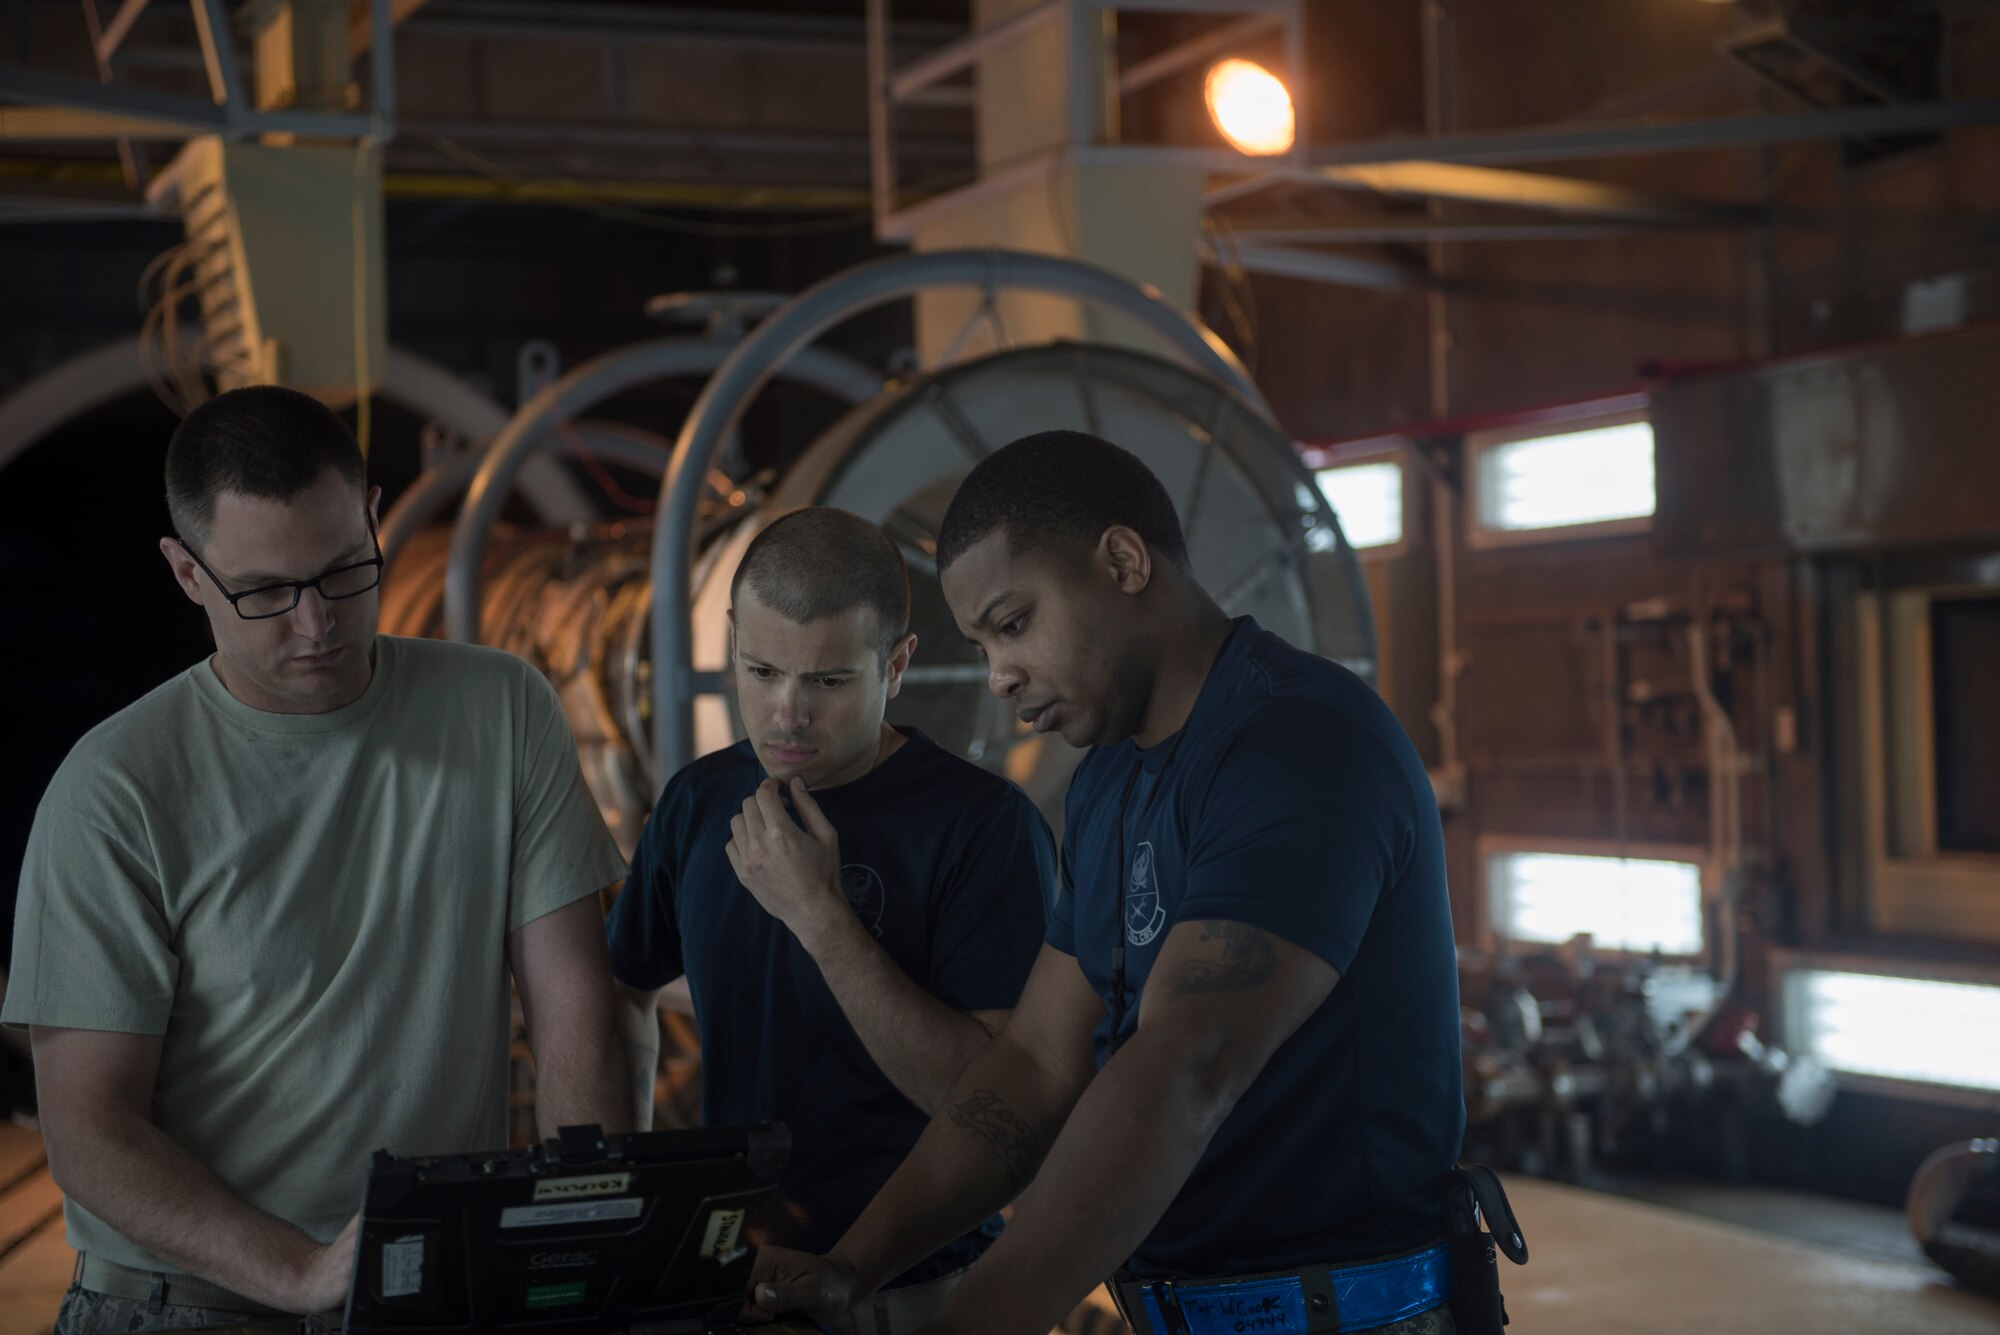 U.S. Air Force Airmen assigned to the 18th Component Maintenance Squadron research inspection limits March 10, 2017, at Kadena Air Base, Japan. Ensuring every part of the engine is ready and safe is of the highest priority when it comes to keeping the mission moving. (U.S. Air Force photo by Airman 1st Class Quay Drawdy)